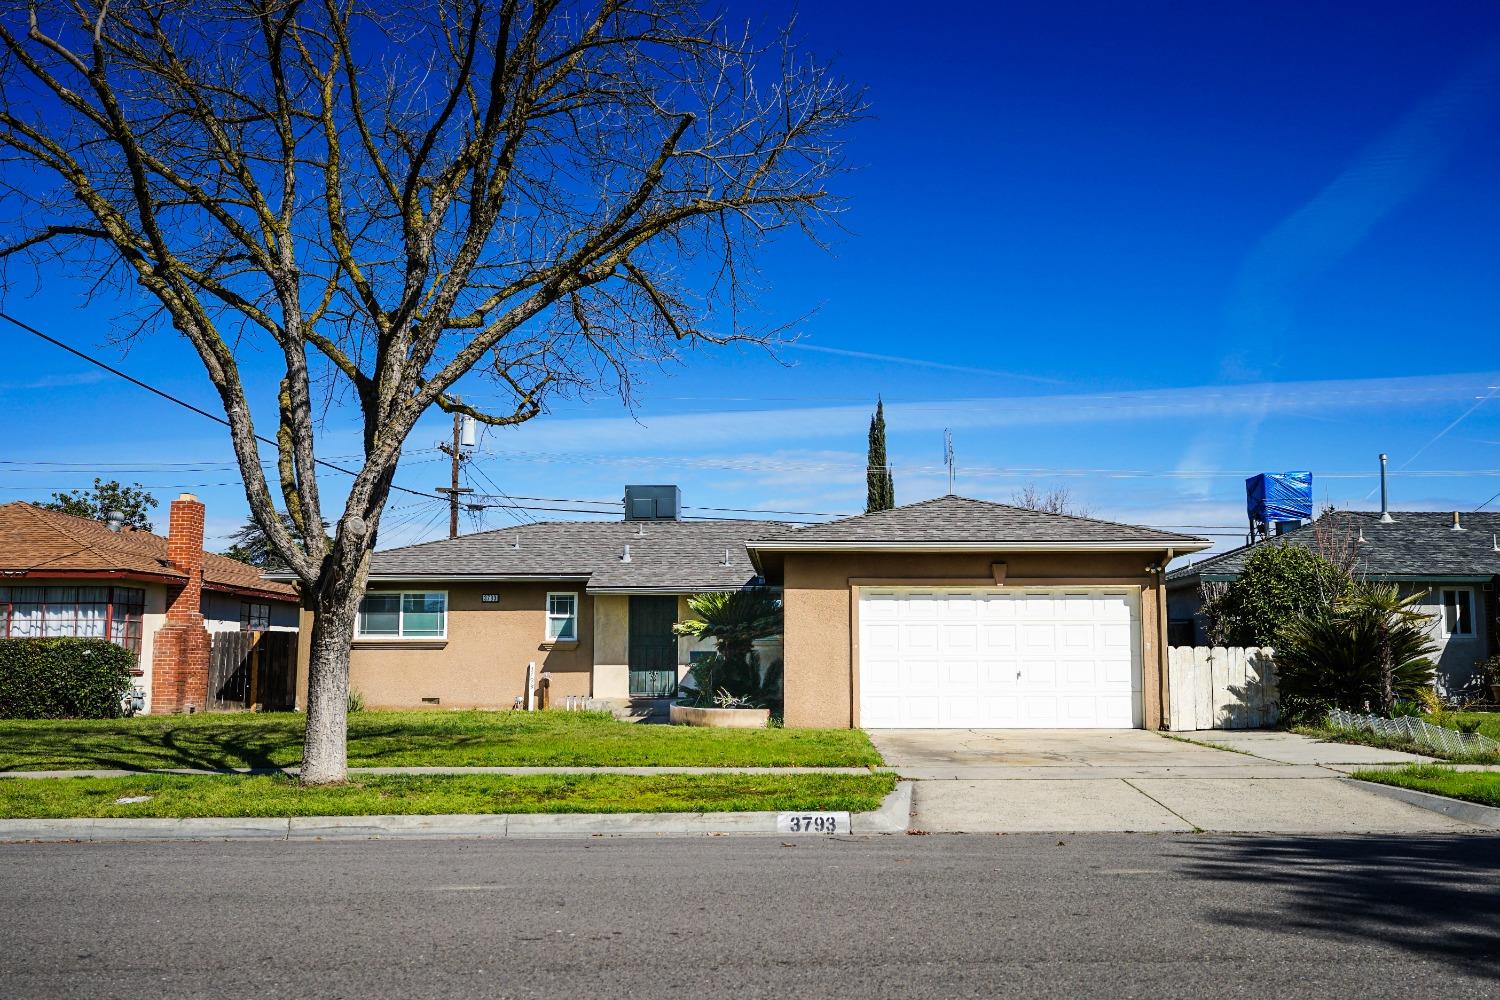 Photo of 3793 E Sussex Wy in Fresno, CA